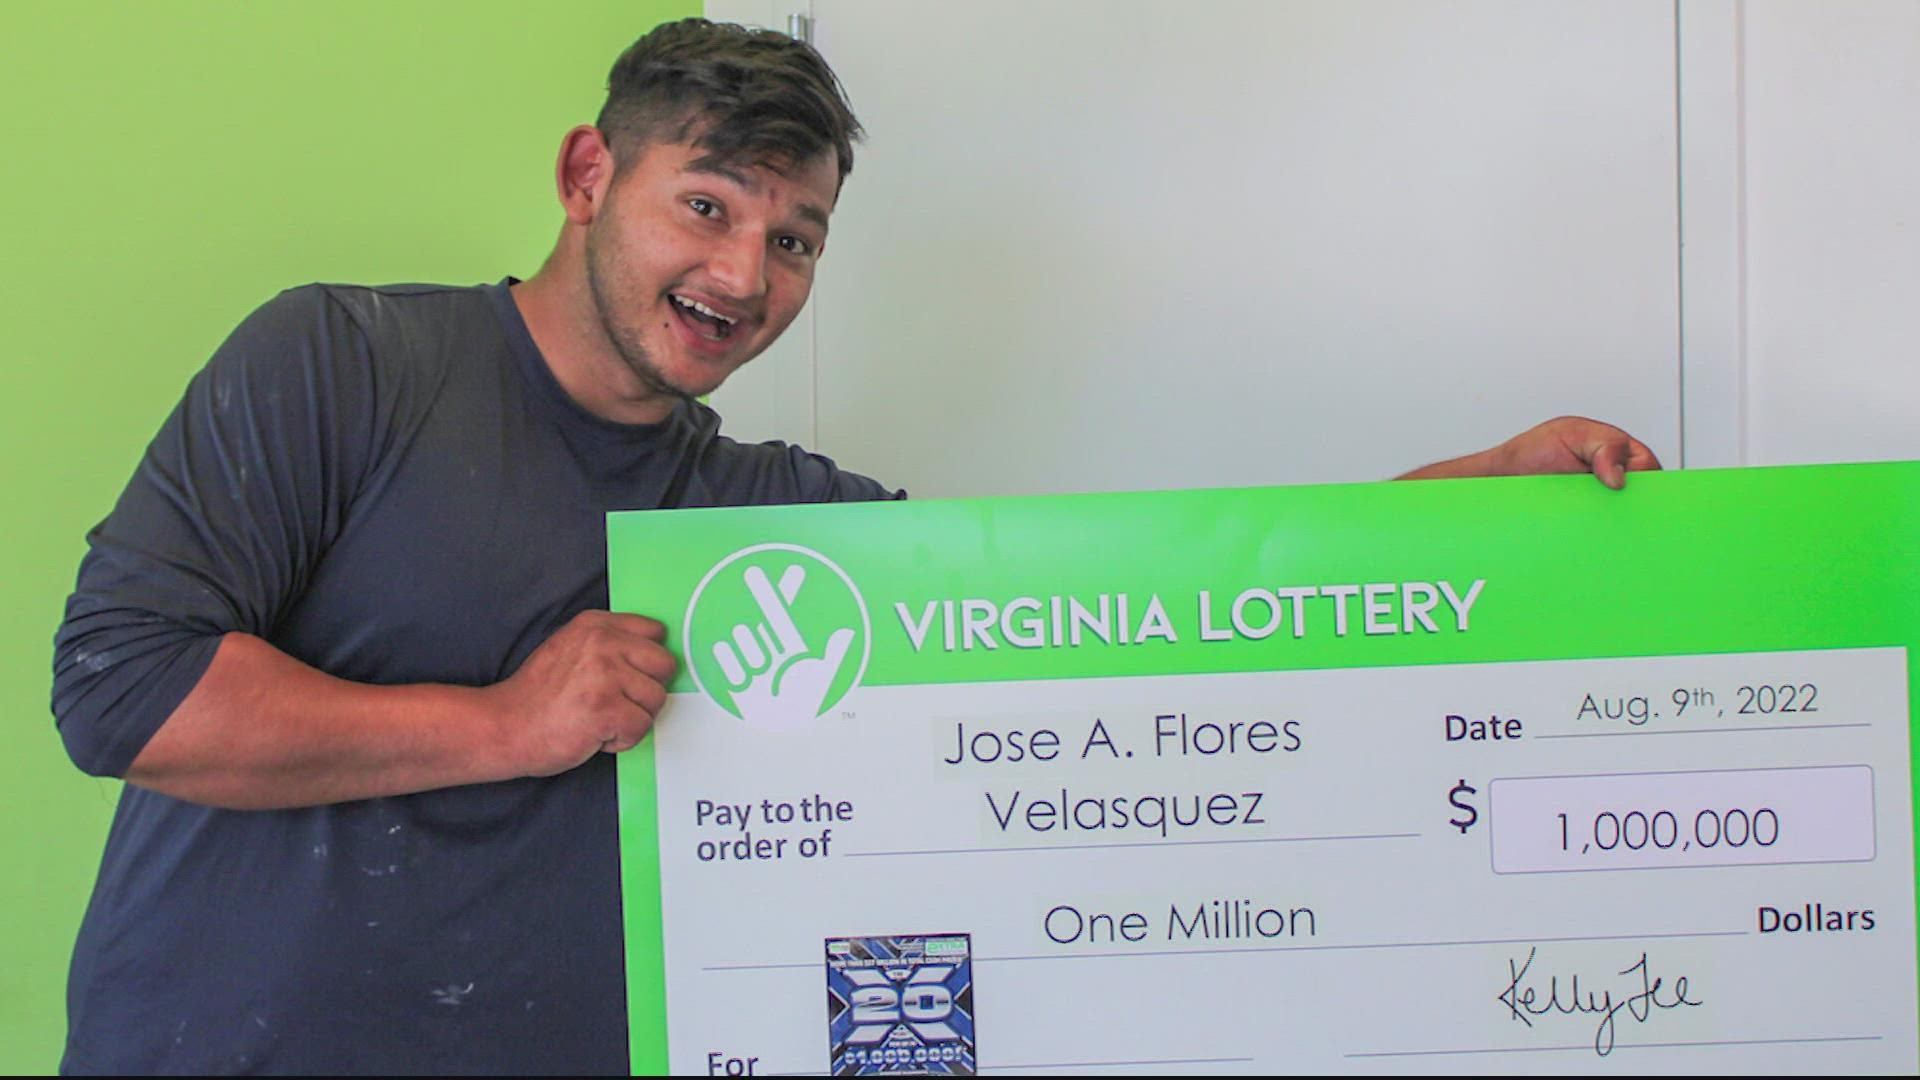 The man thought he won $600, but he actually won $1 million!